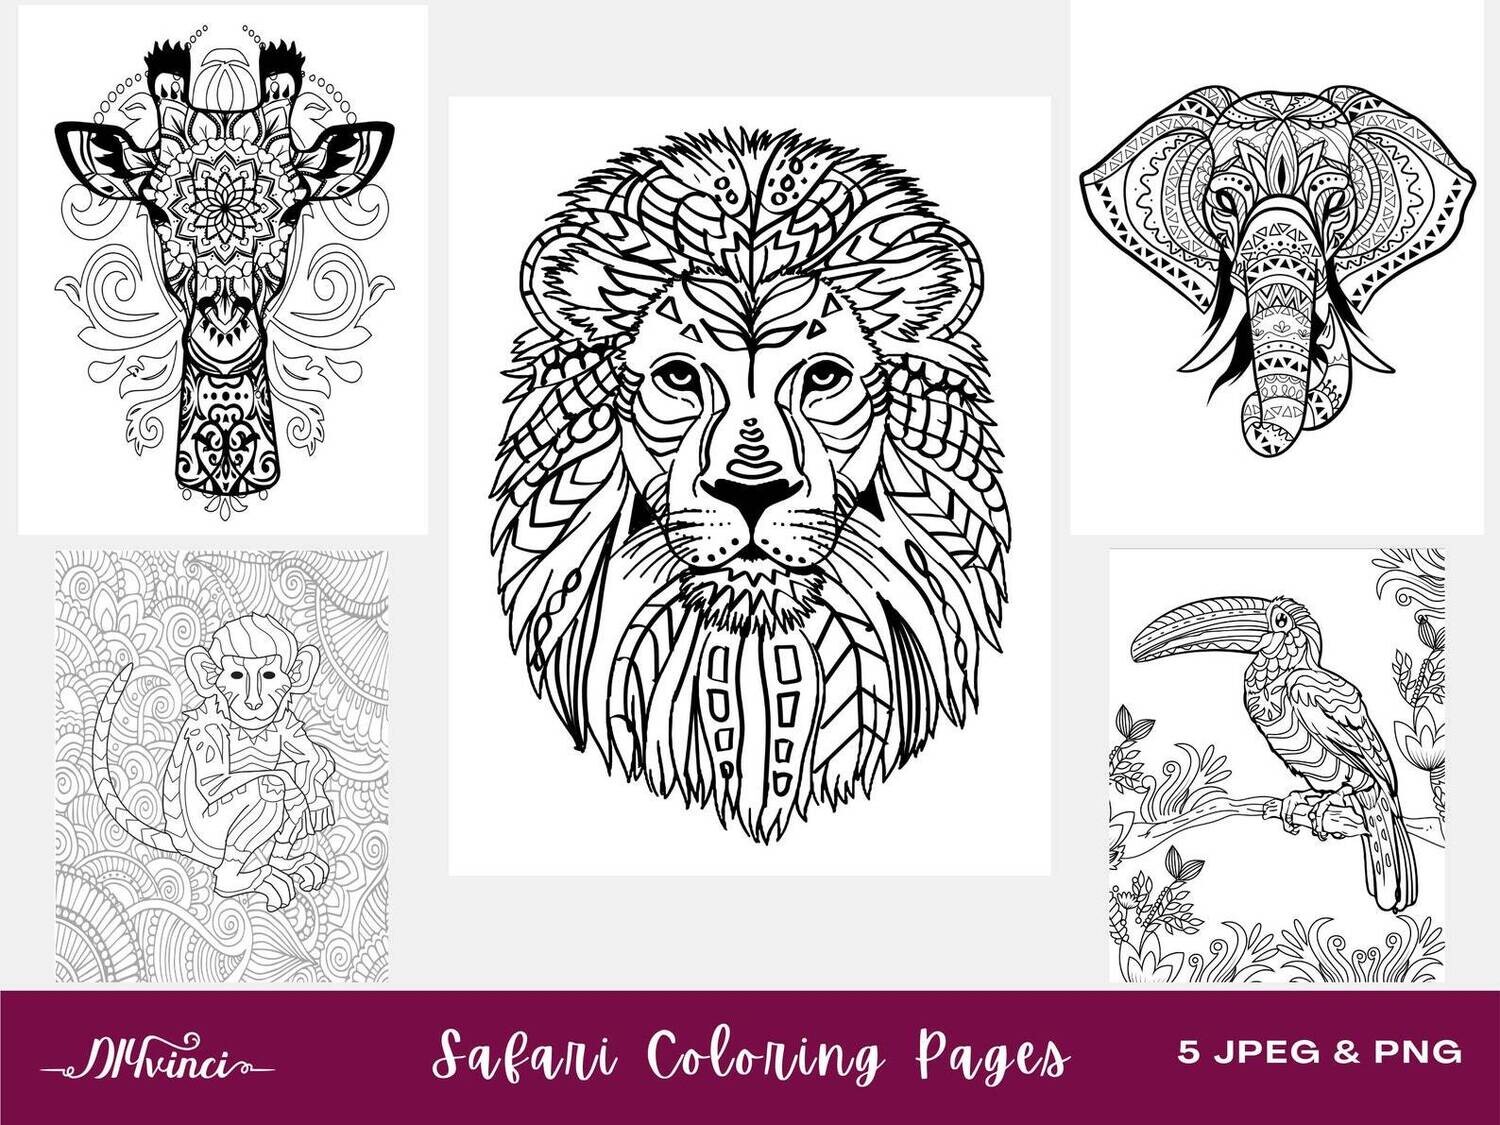 Safari Printable Coloring Pages   20 JPEG & PNG   Personal and Commercial Use